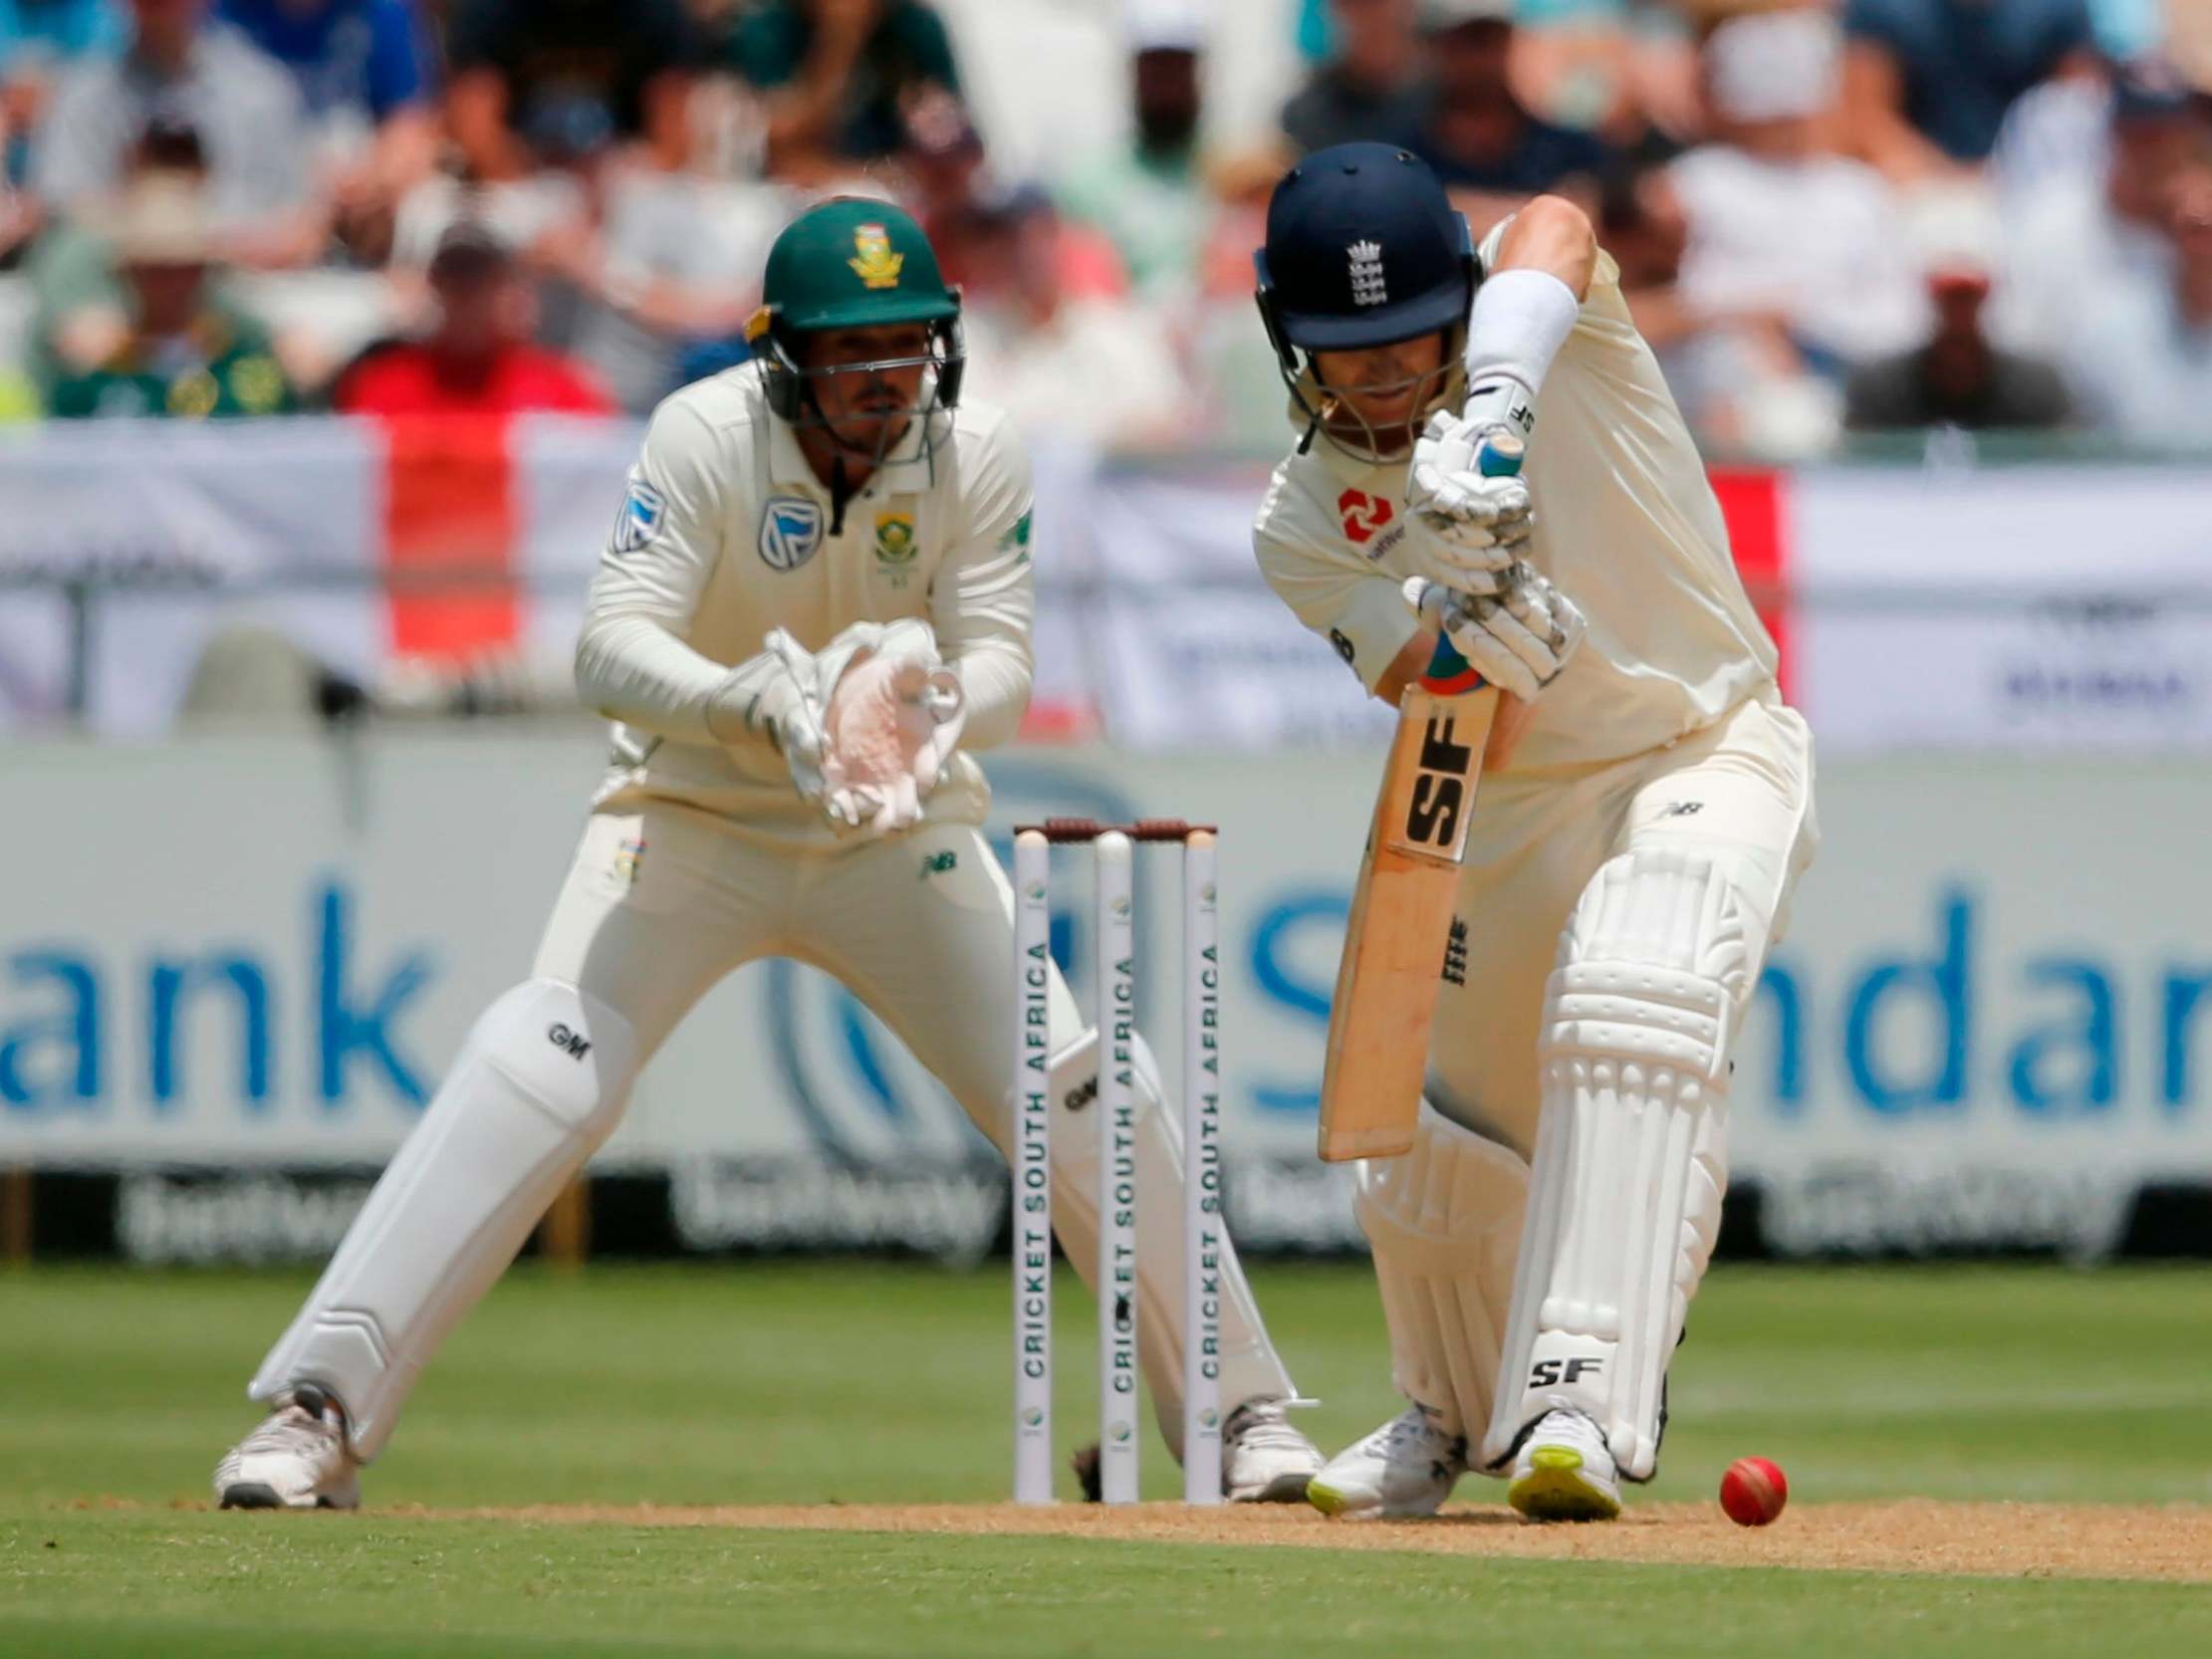 England won an important toss and batted at Newlands